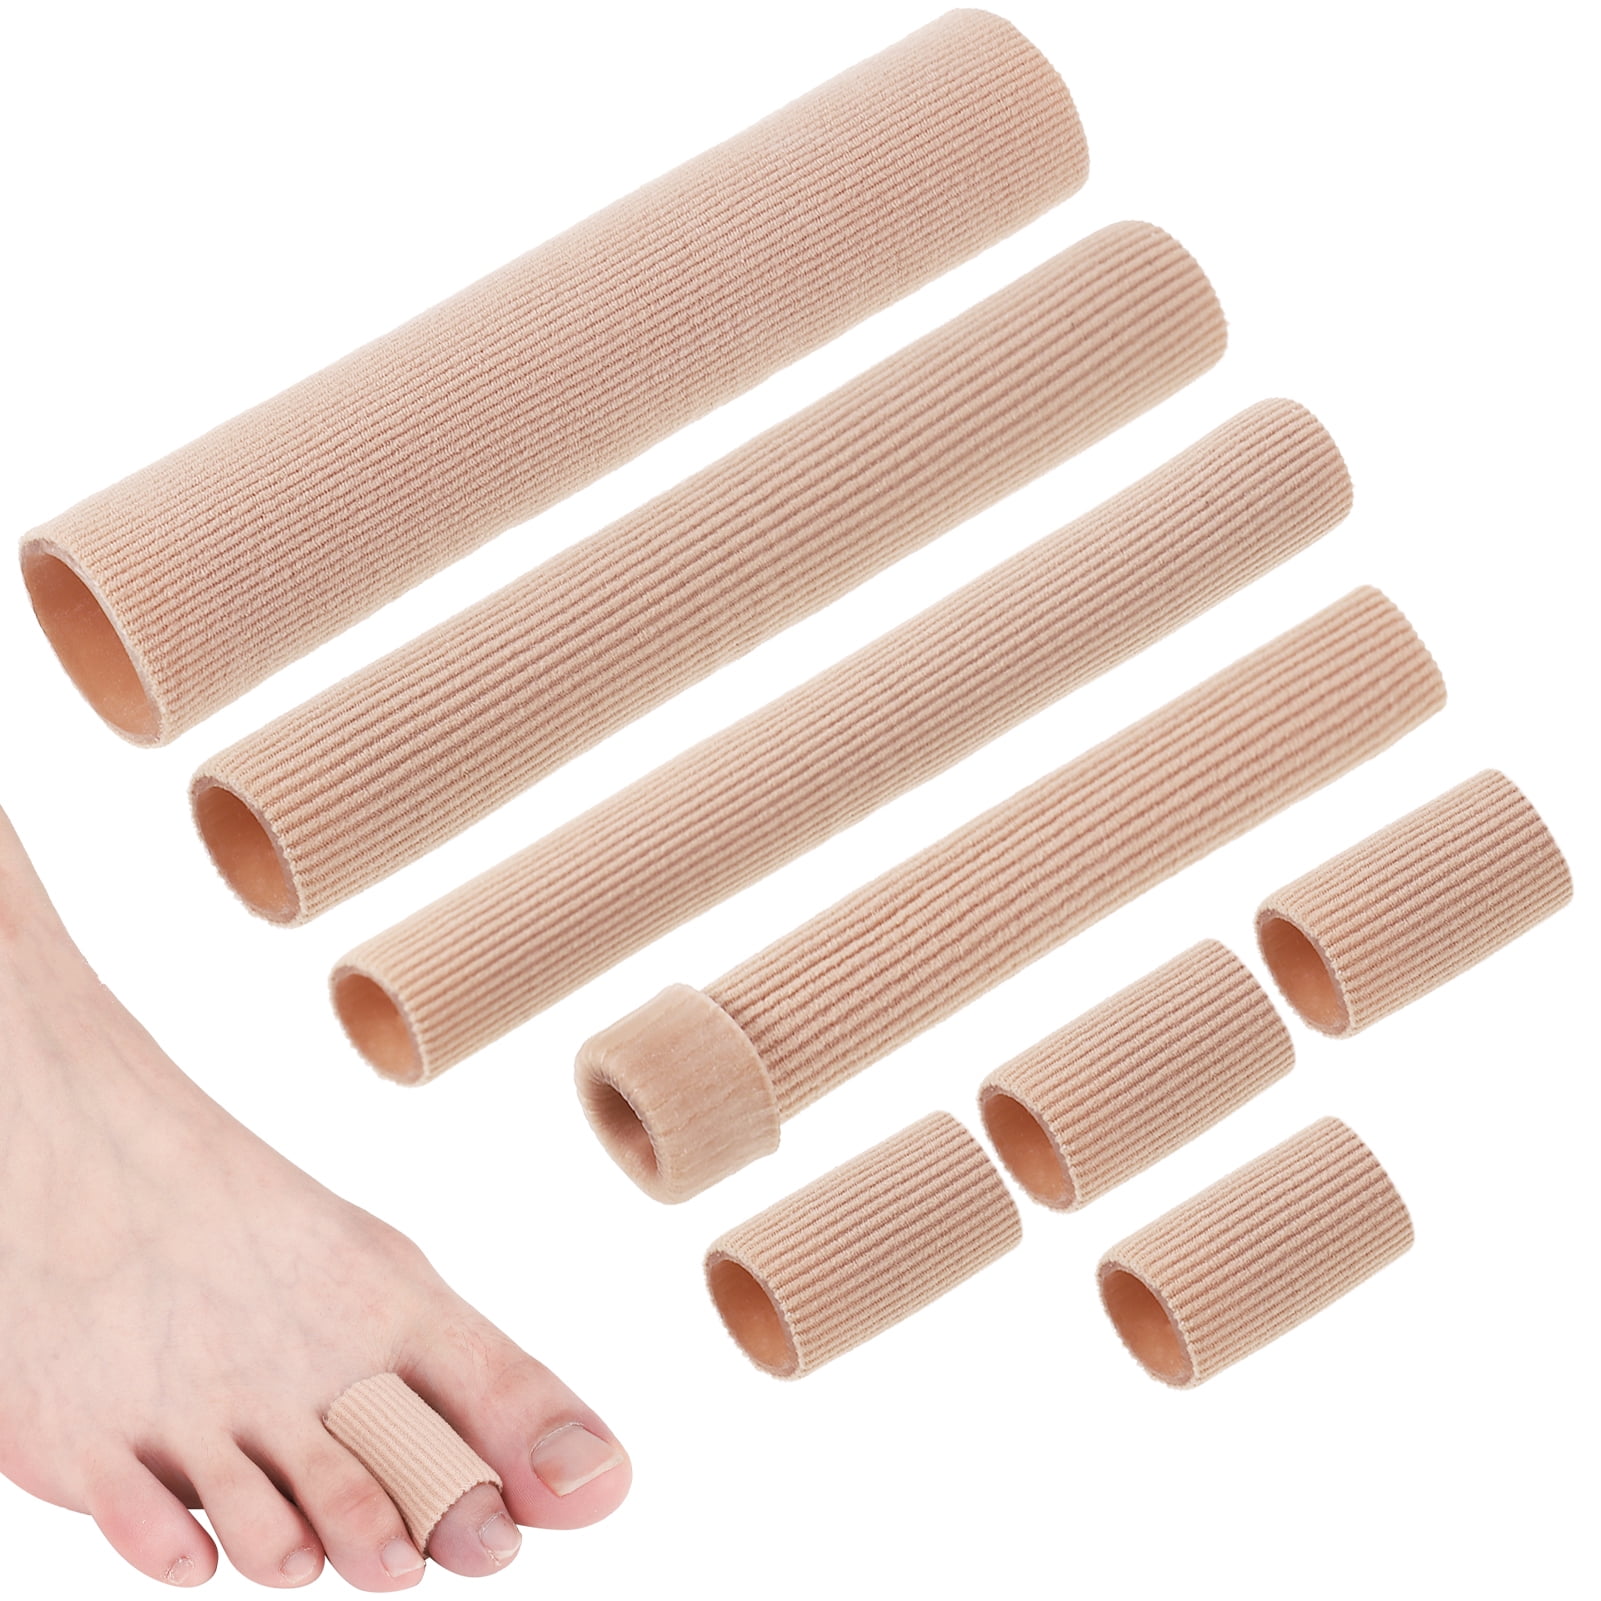 COHEALI 6Pcs Lambs Wool for Toes Soft Toe Separator Lambs Wool Toe Spacers  Toe Cushions Corn Cushion Pads Blister Prevention Bunions Callus Remover